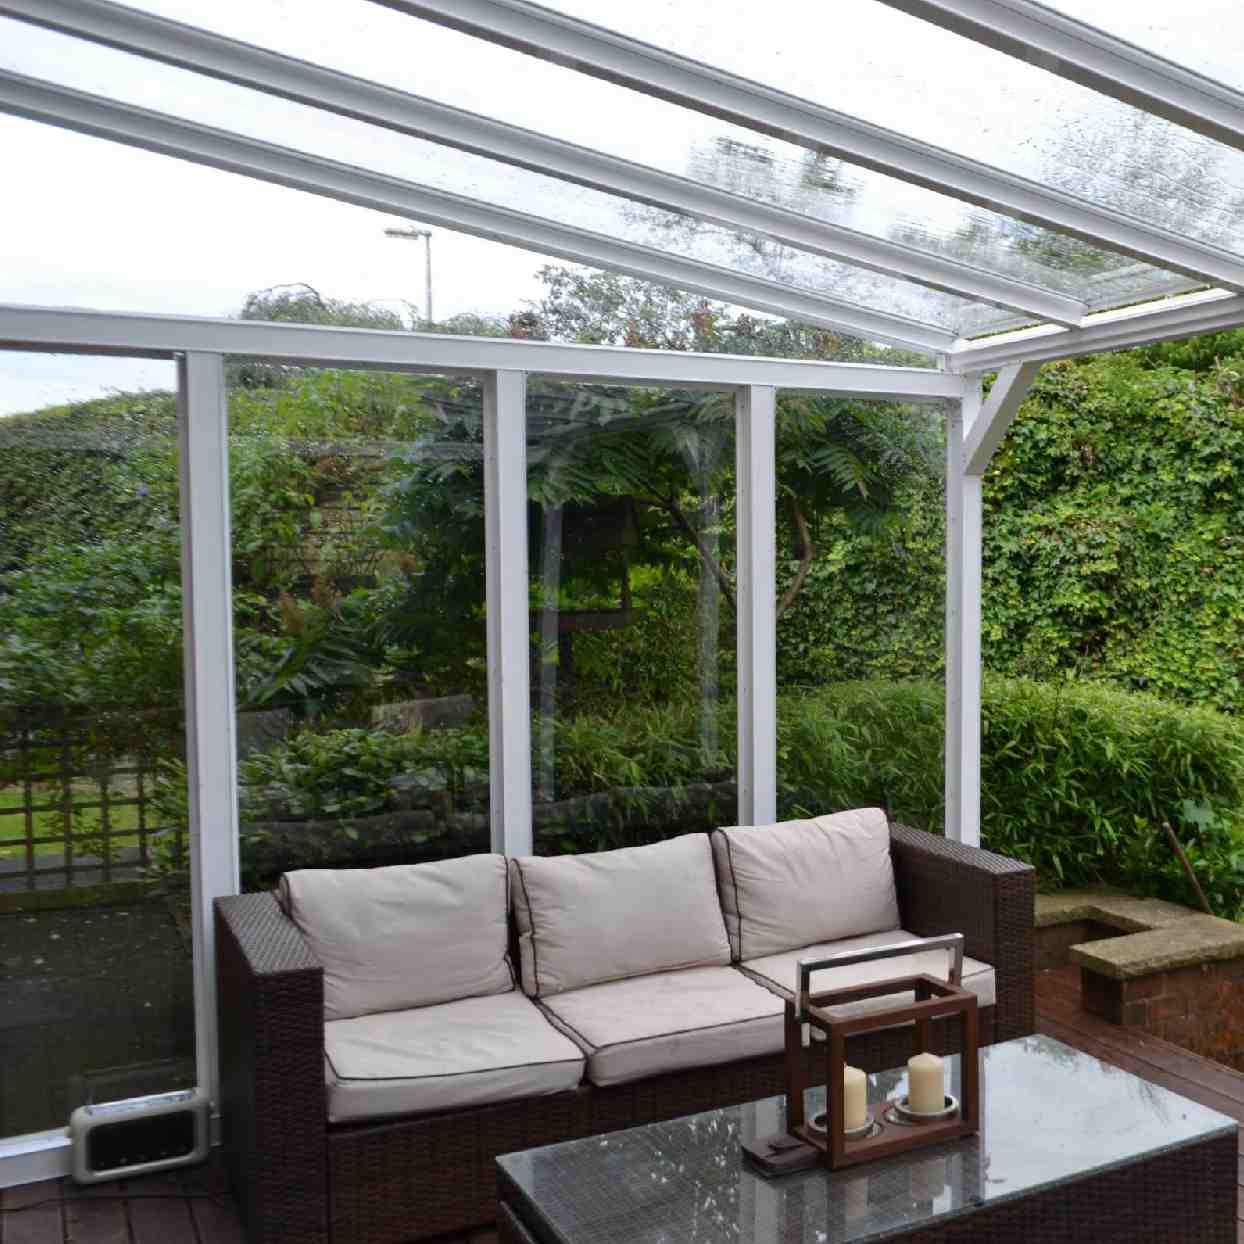 Buy Omega Verandah White with 6mm Glass Clear Plate Polycarbonate Glazing - 2.8m (W) x 3.5m (P), (2) Supporting Posts online today